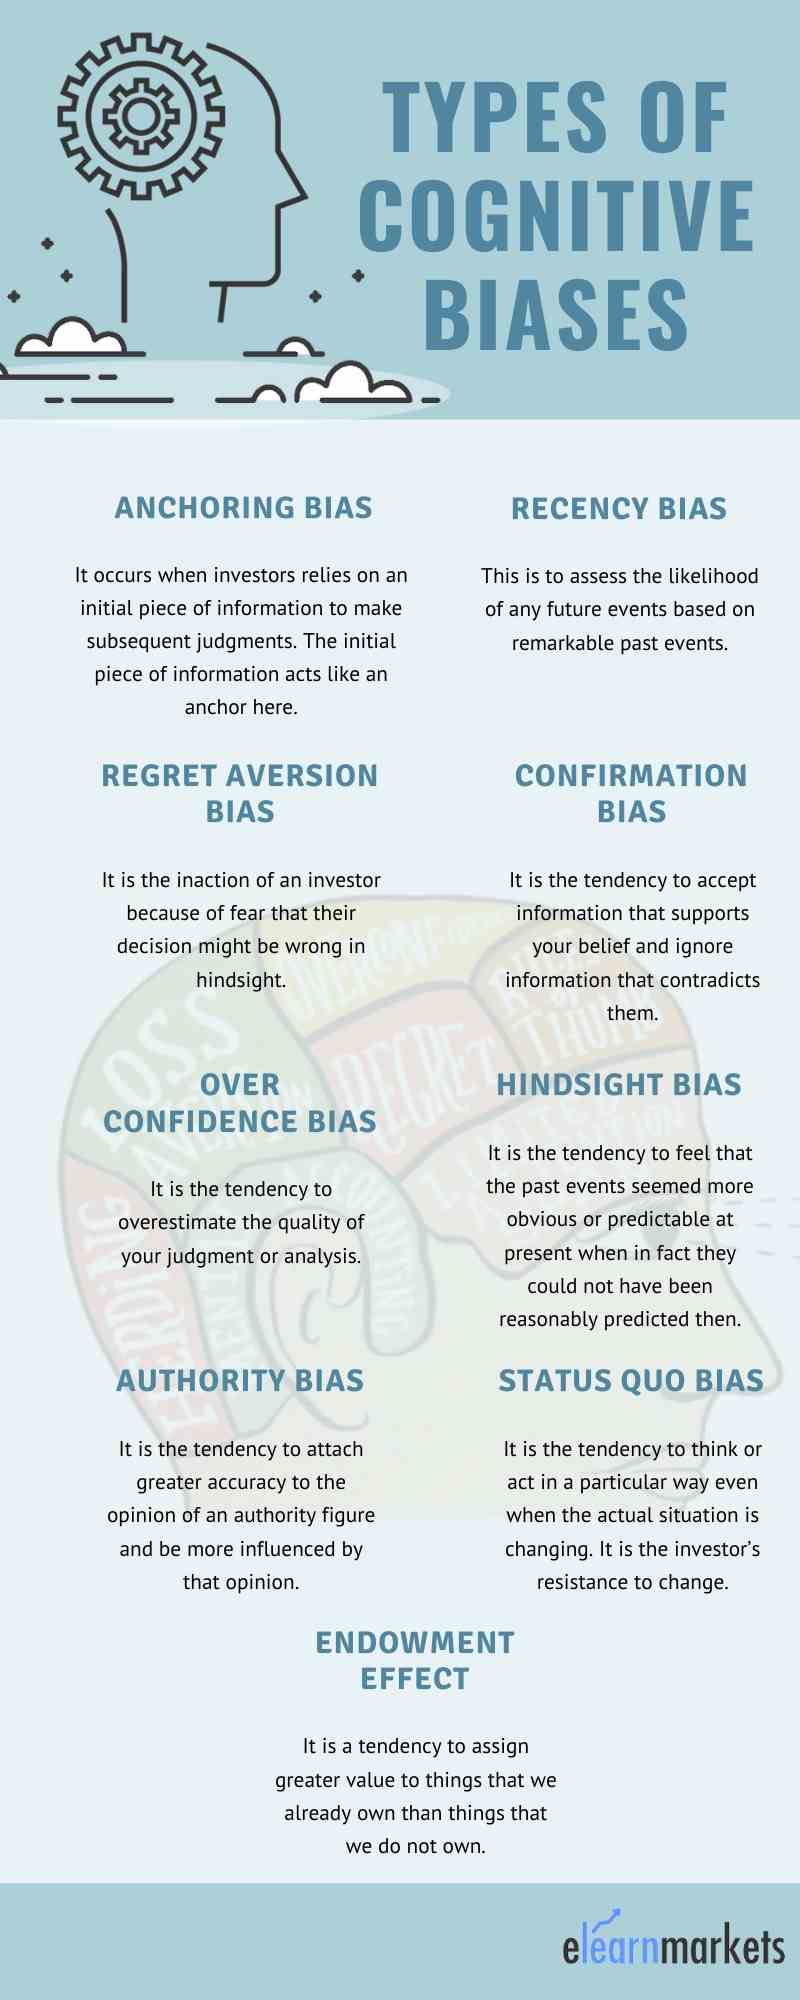 Cognitive Biases and types of cognitive biases.